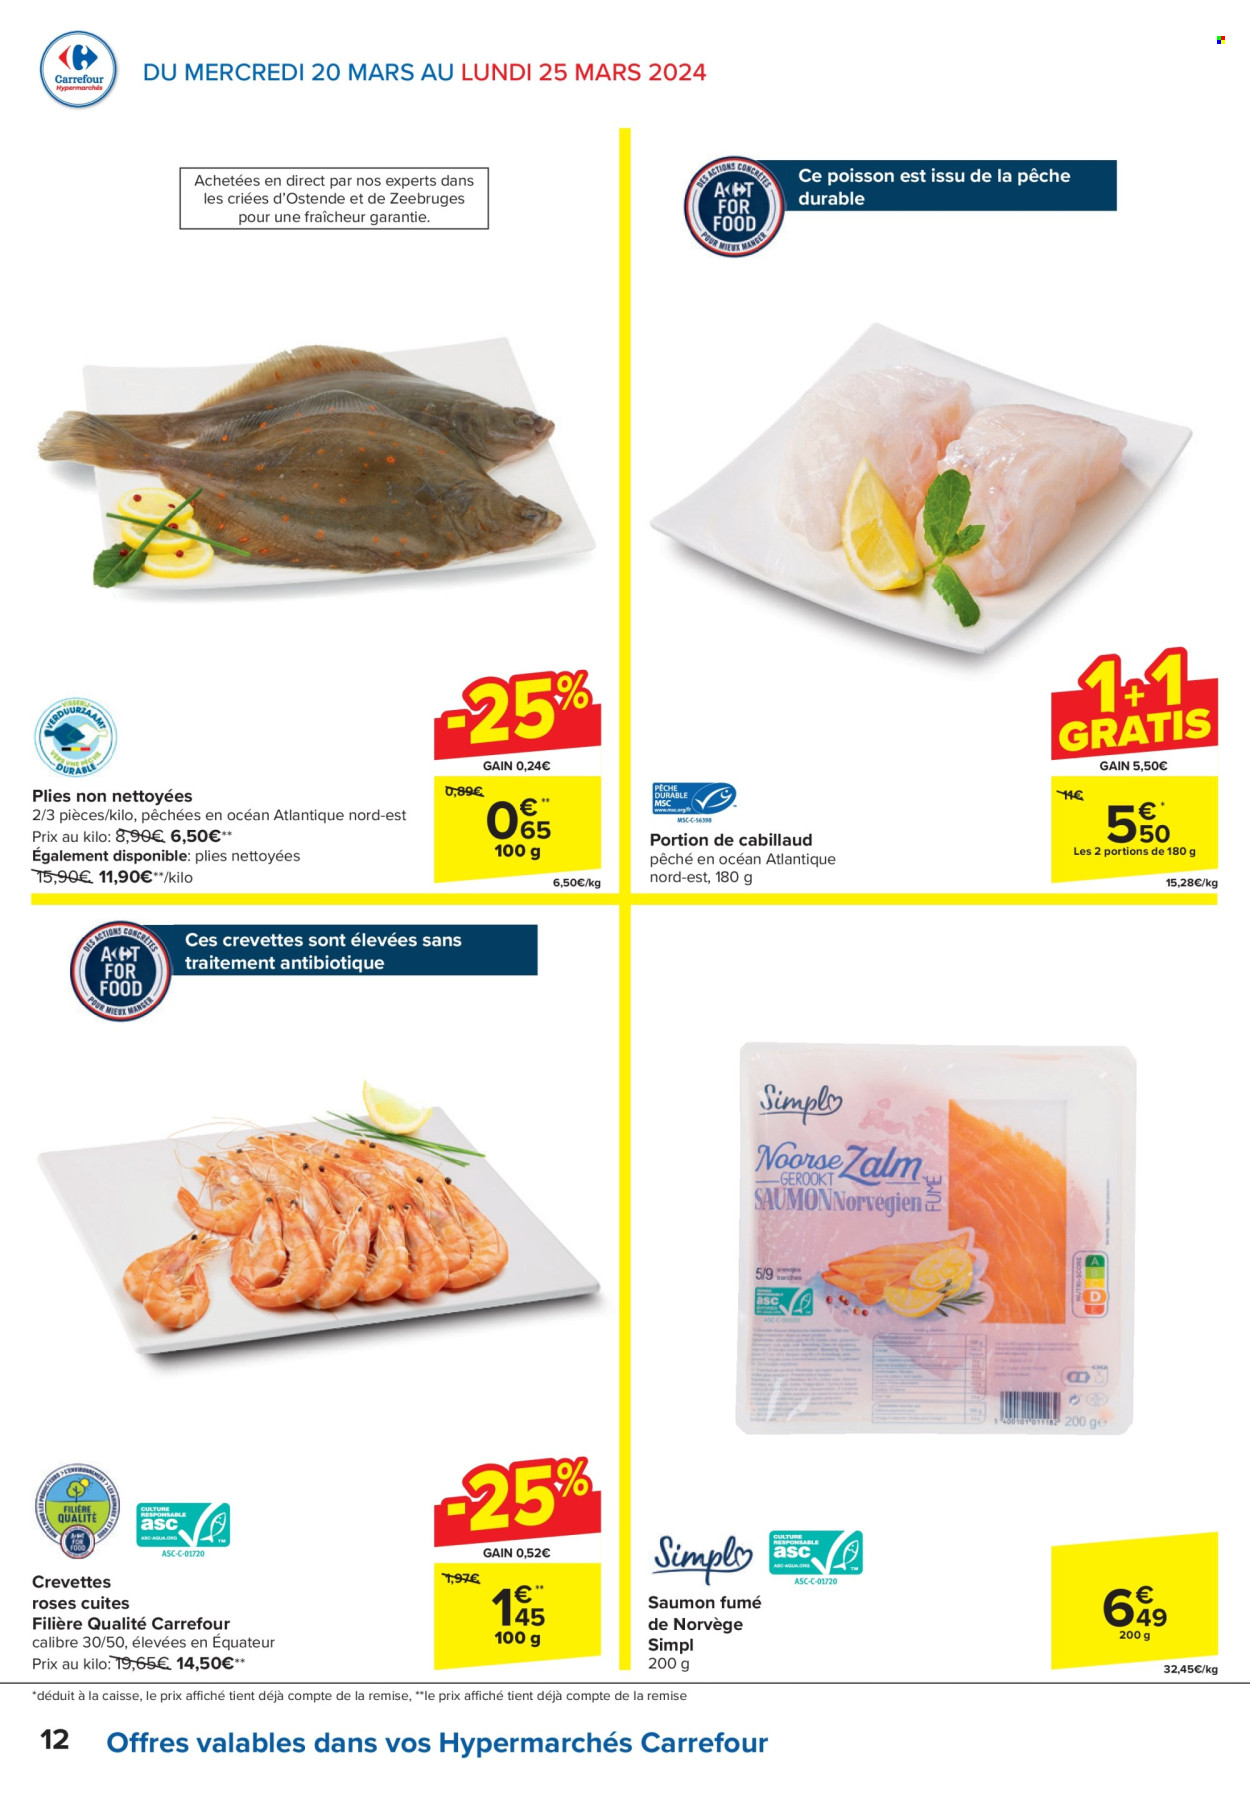 Catalogue Carrefour hypermarkt - 20.3.2024 - 2.4.2024. Page 12.